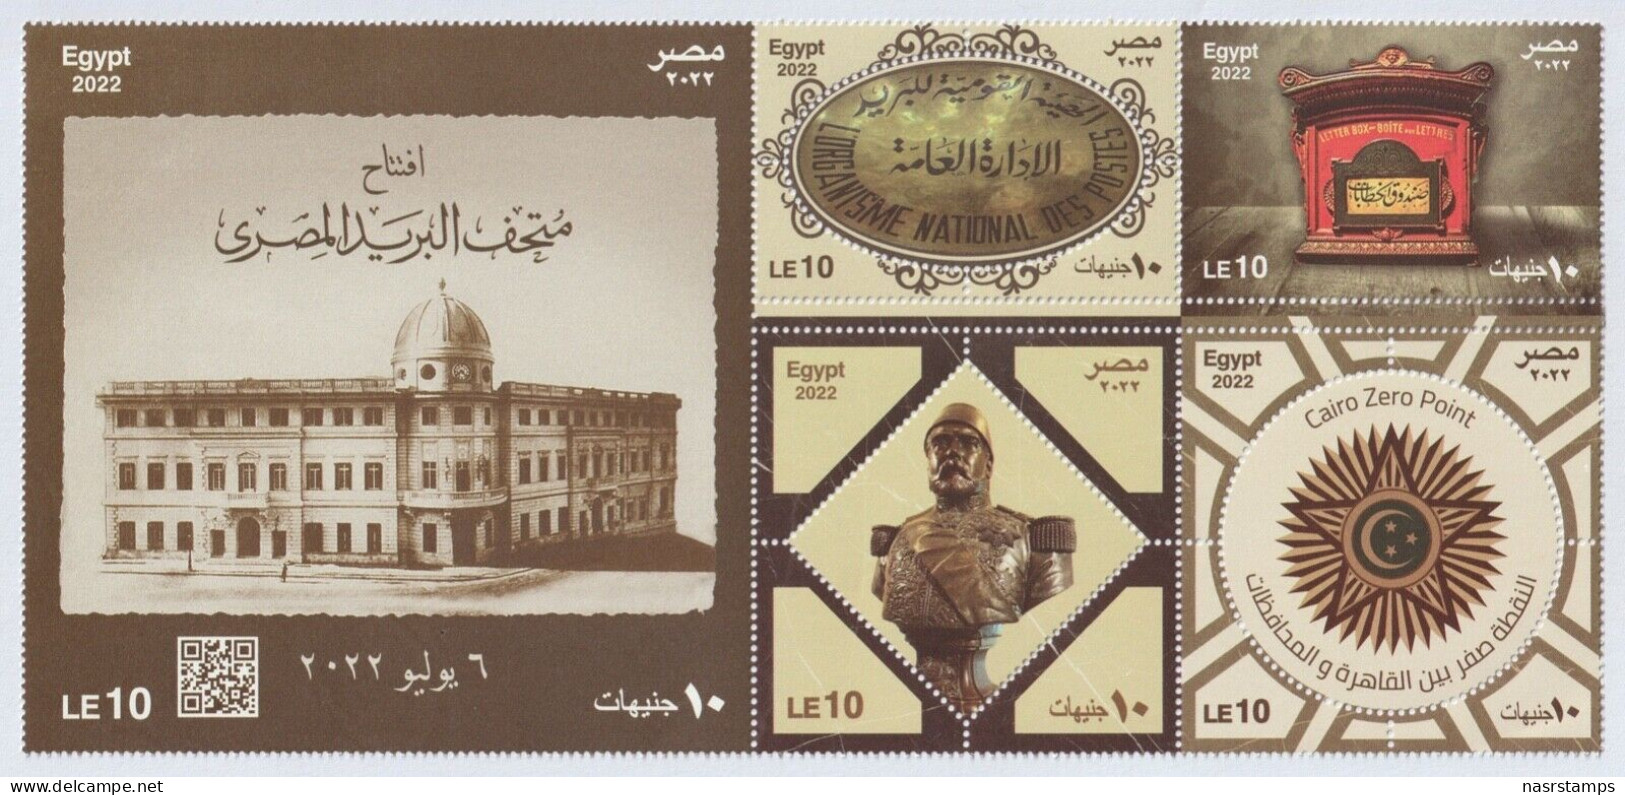 Egypt - 2022 - Complete Set of Issues of 2022 - With S/S - MNH**